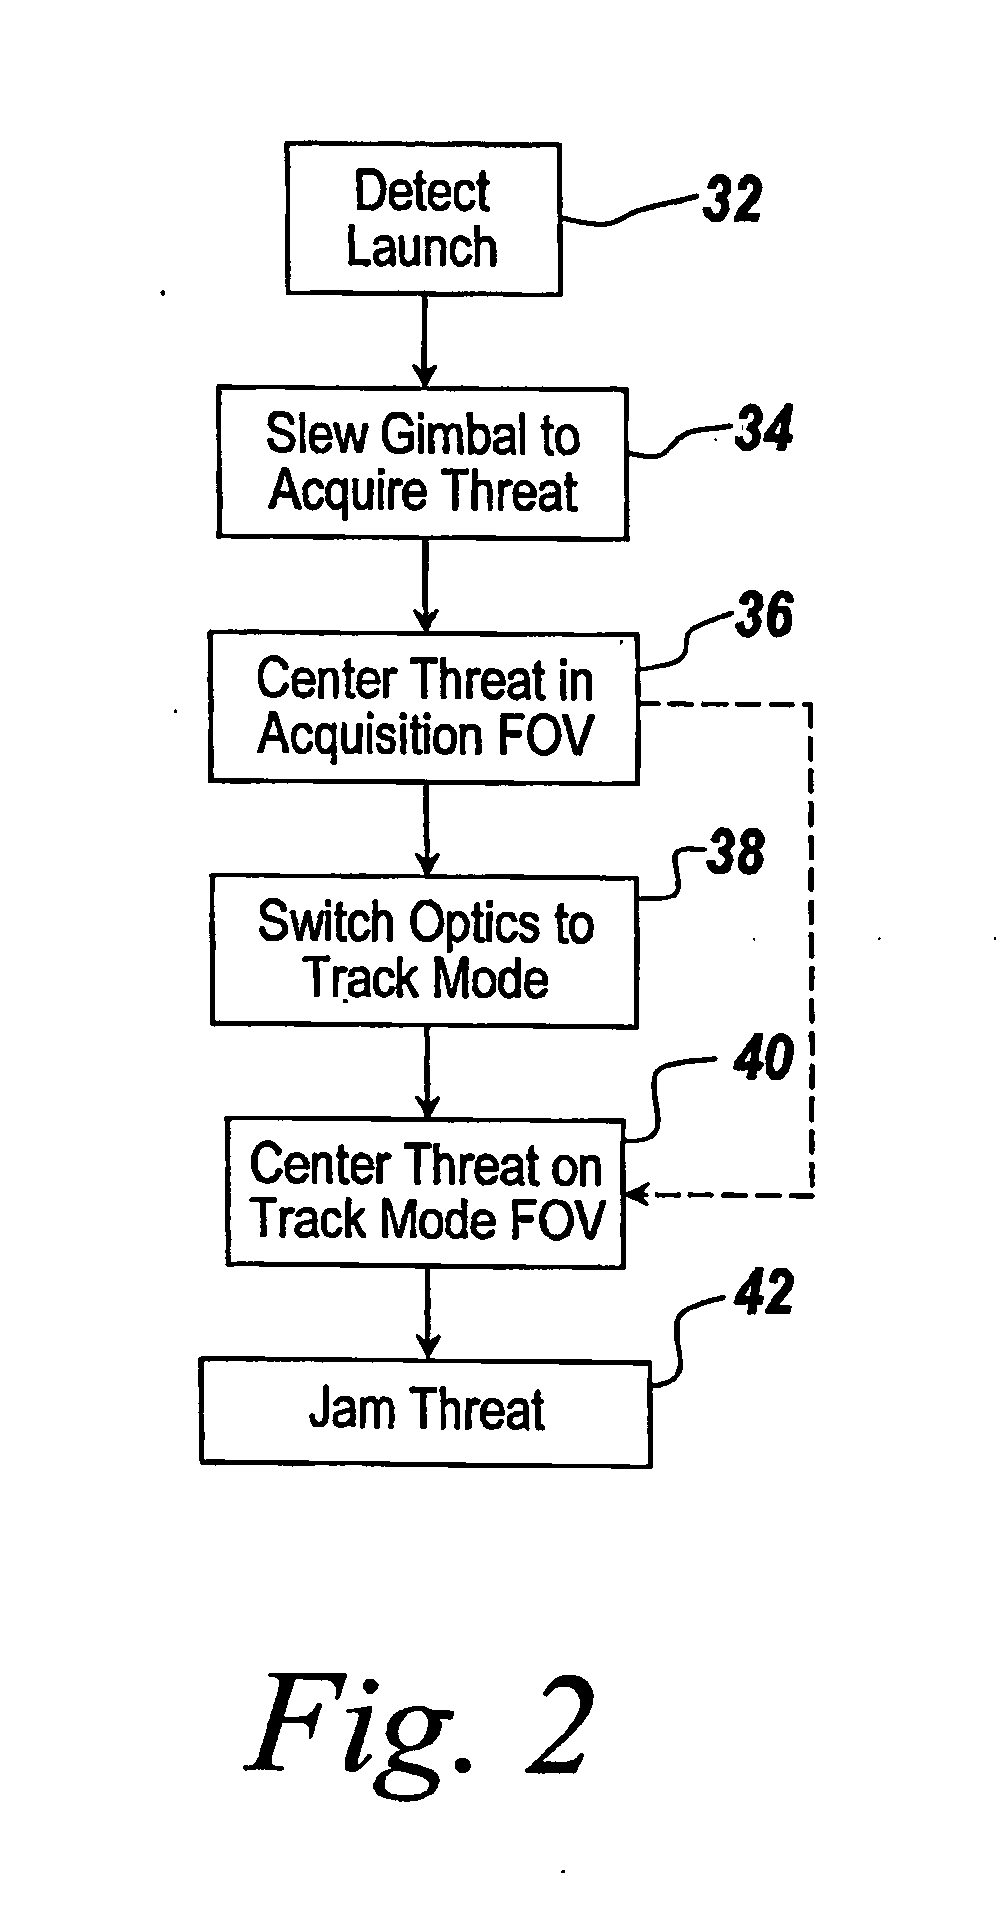 Method and apparatus of using optical distortion in a directed countermeasure system to provide a variable field of view